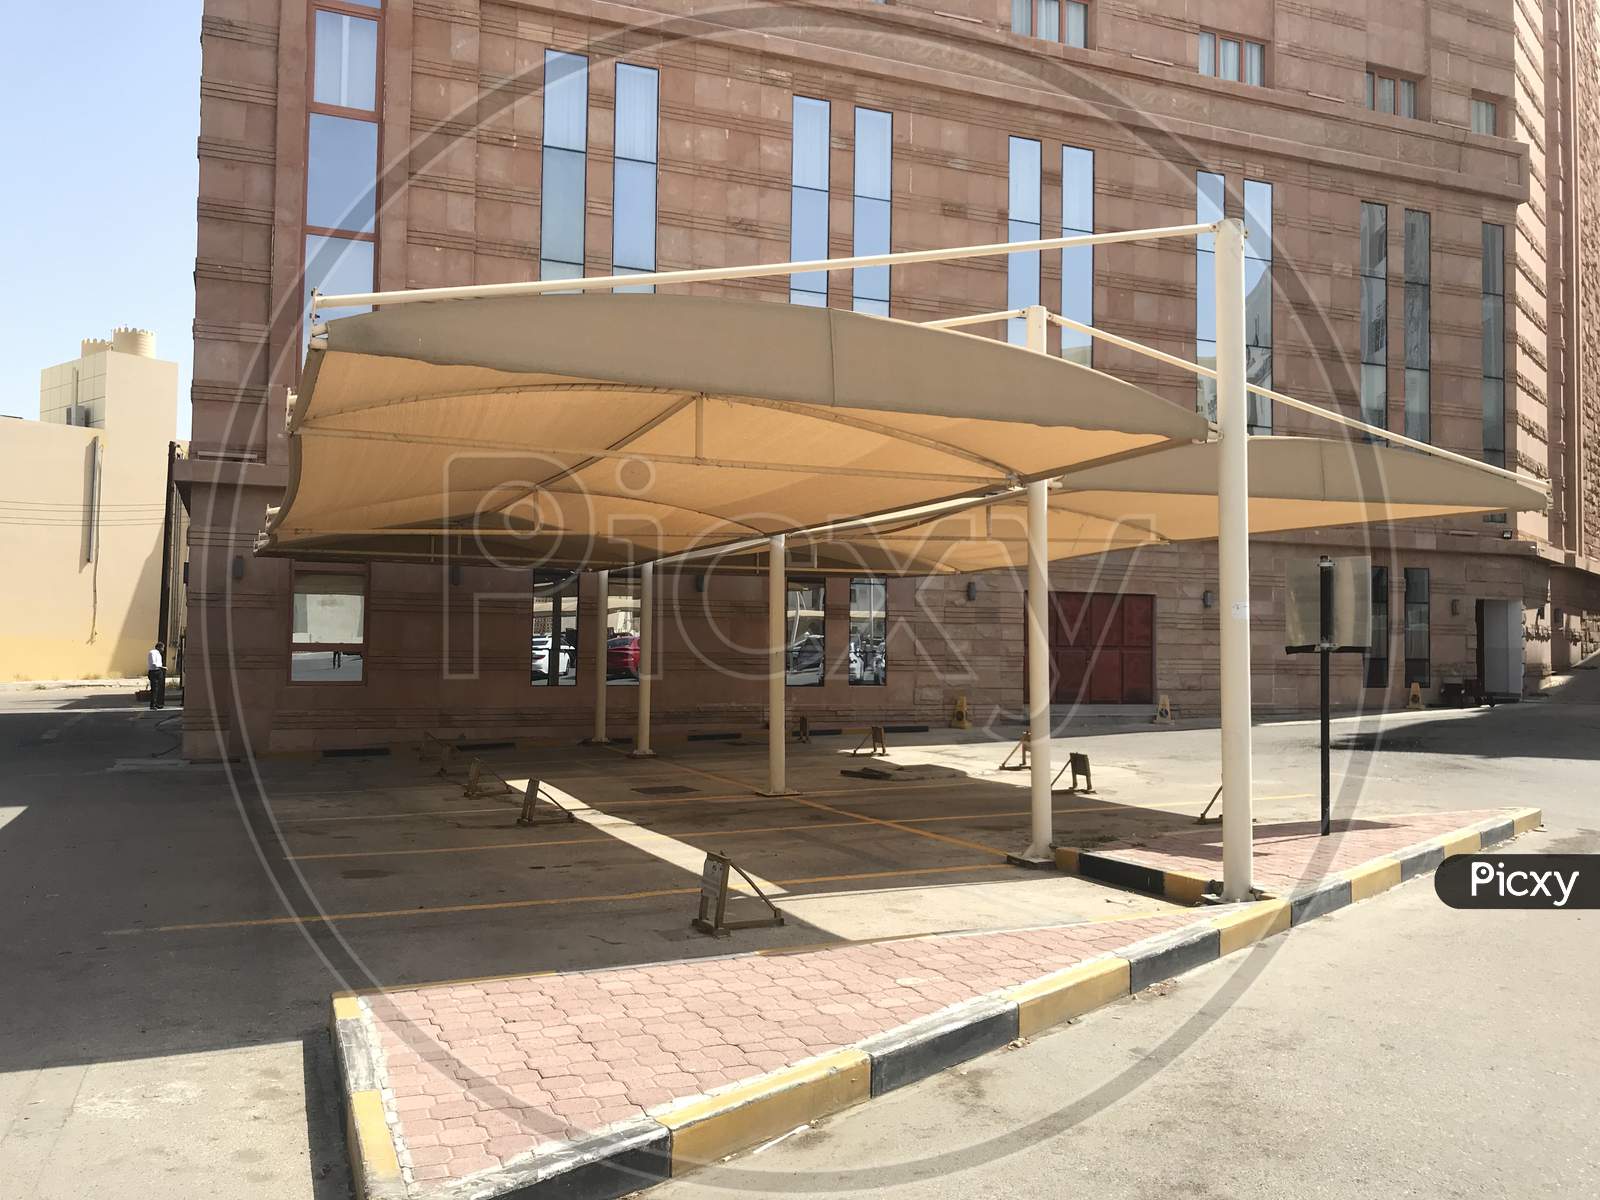 Heavy Duty Fabric Tensile Shade Structures For An Parking Lot For The Customers Of An Reputed Five Star Hotel Building Outdoor Area At Muscat Oman